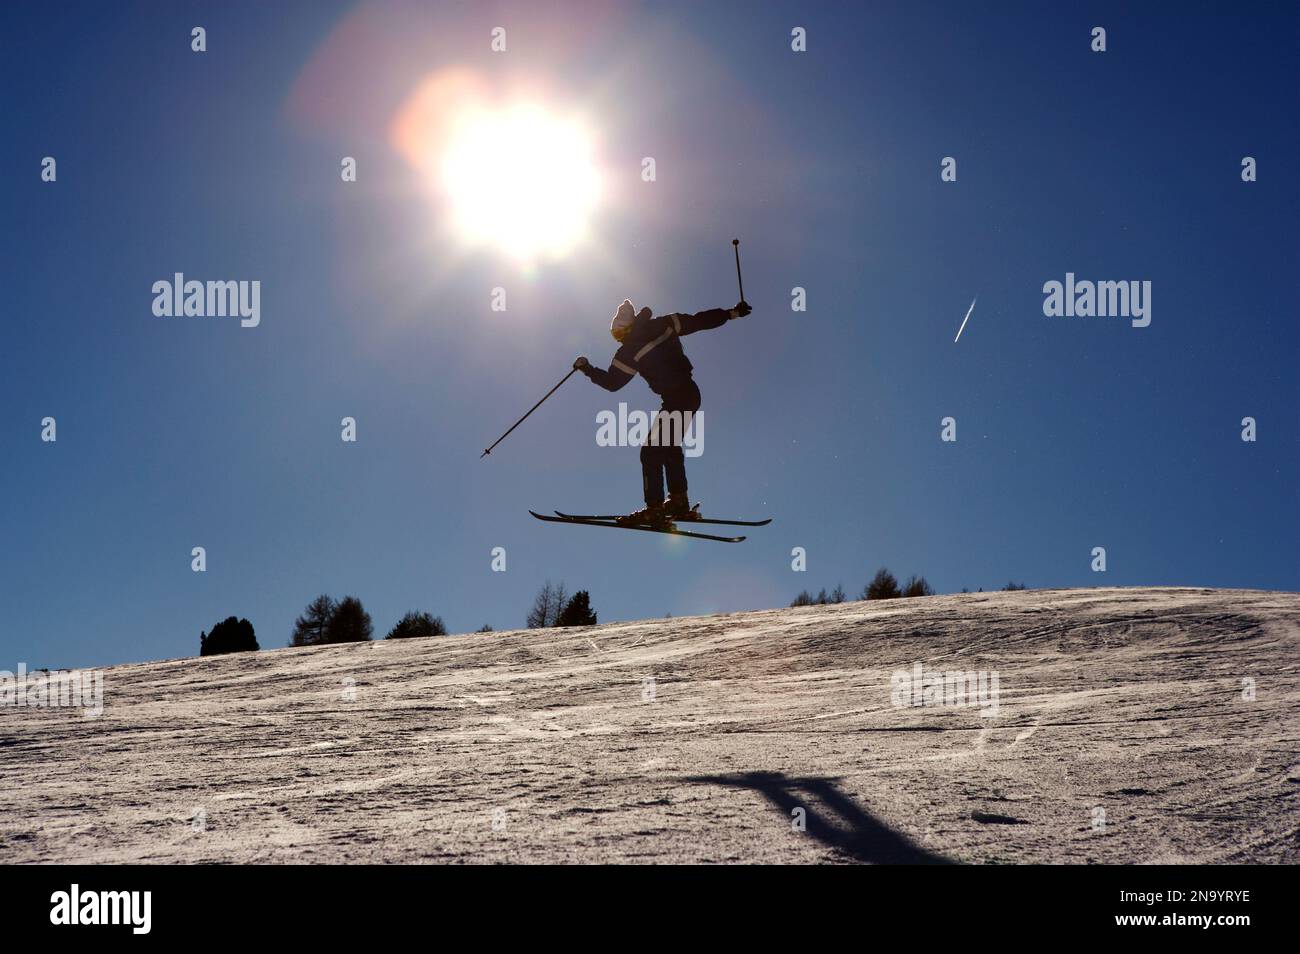 Skier taking a jump at the Siusi ski area in Italy; Seis am Schlern, South Tyrol, Italy Stock Photo